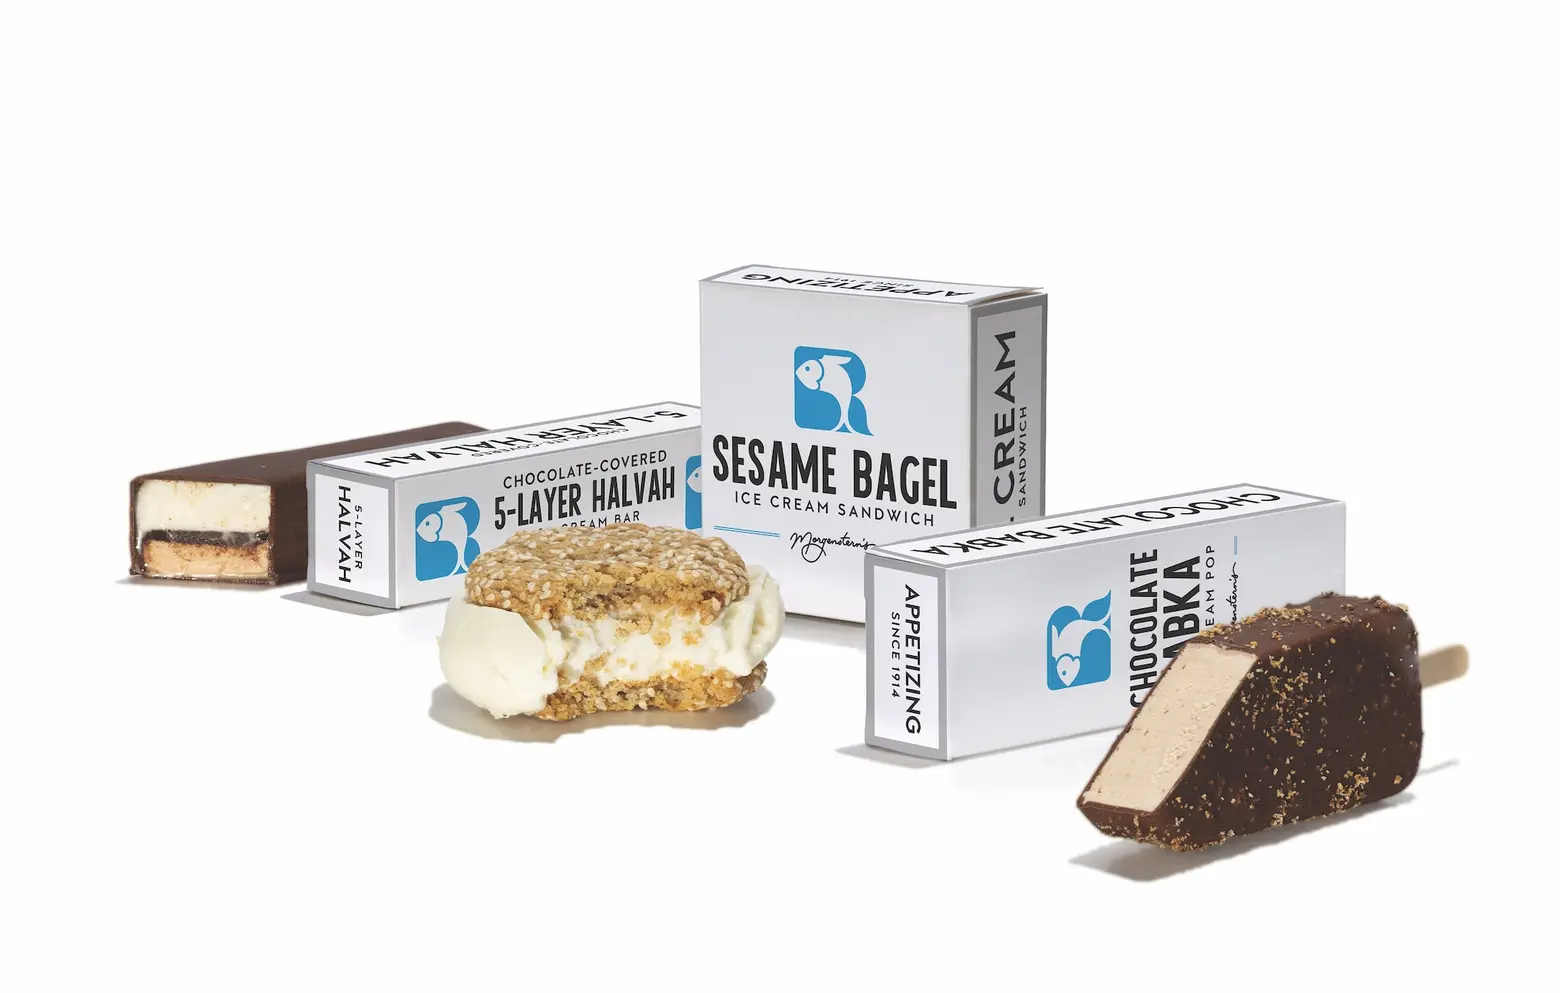 NYC’s Russ & Daughters and Morgenstern’s team up for deli-style ice cream treats